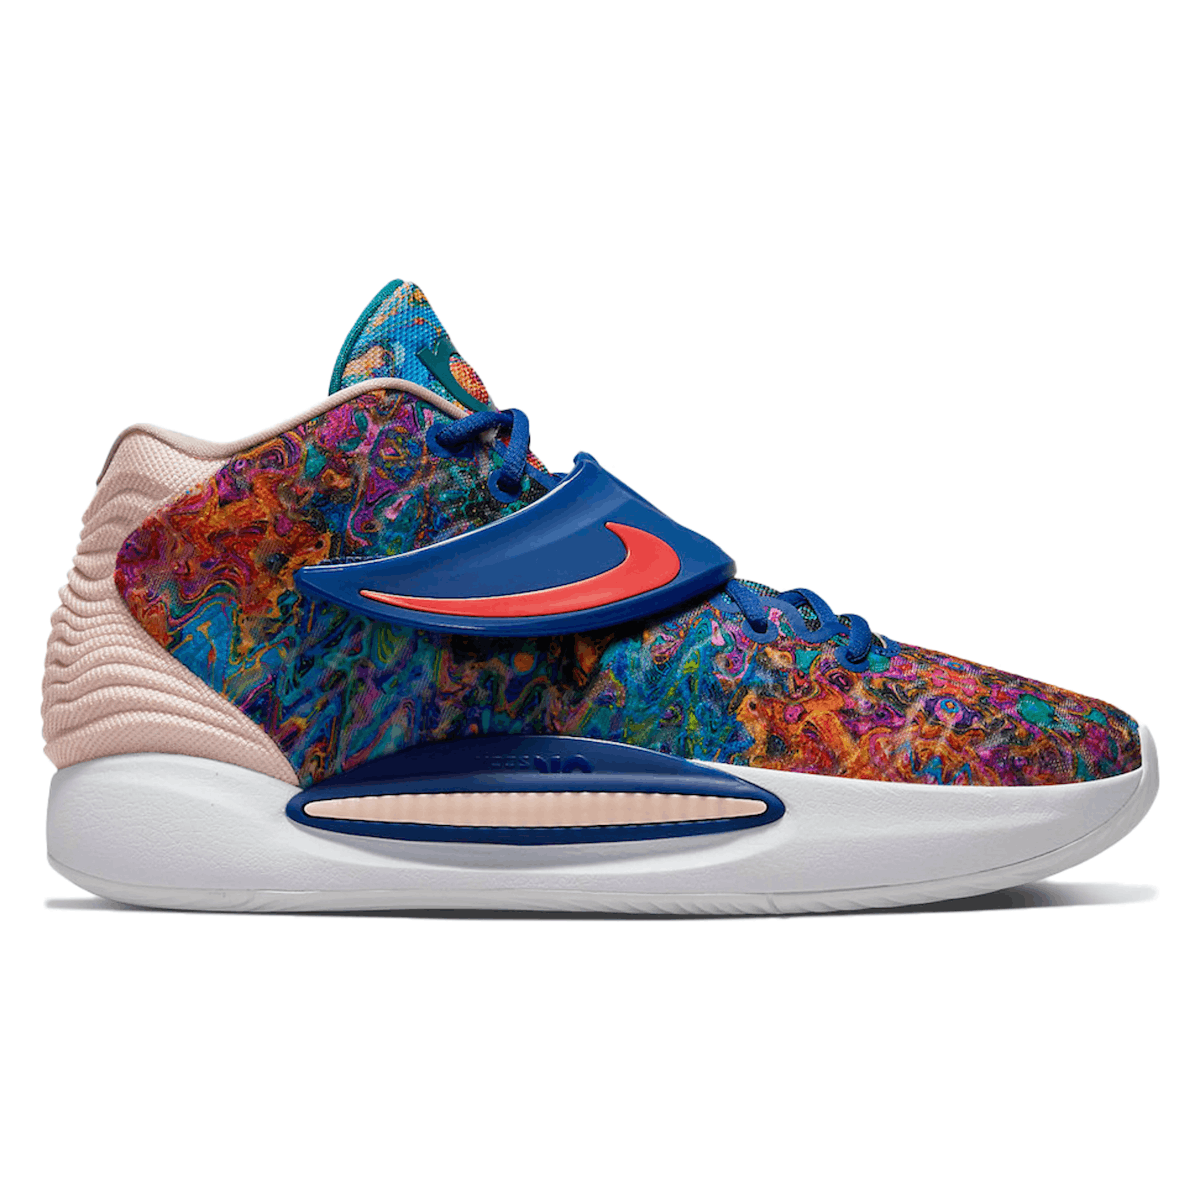 Nike KD 14 "Psychedelic"